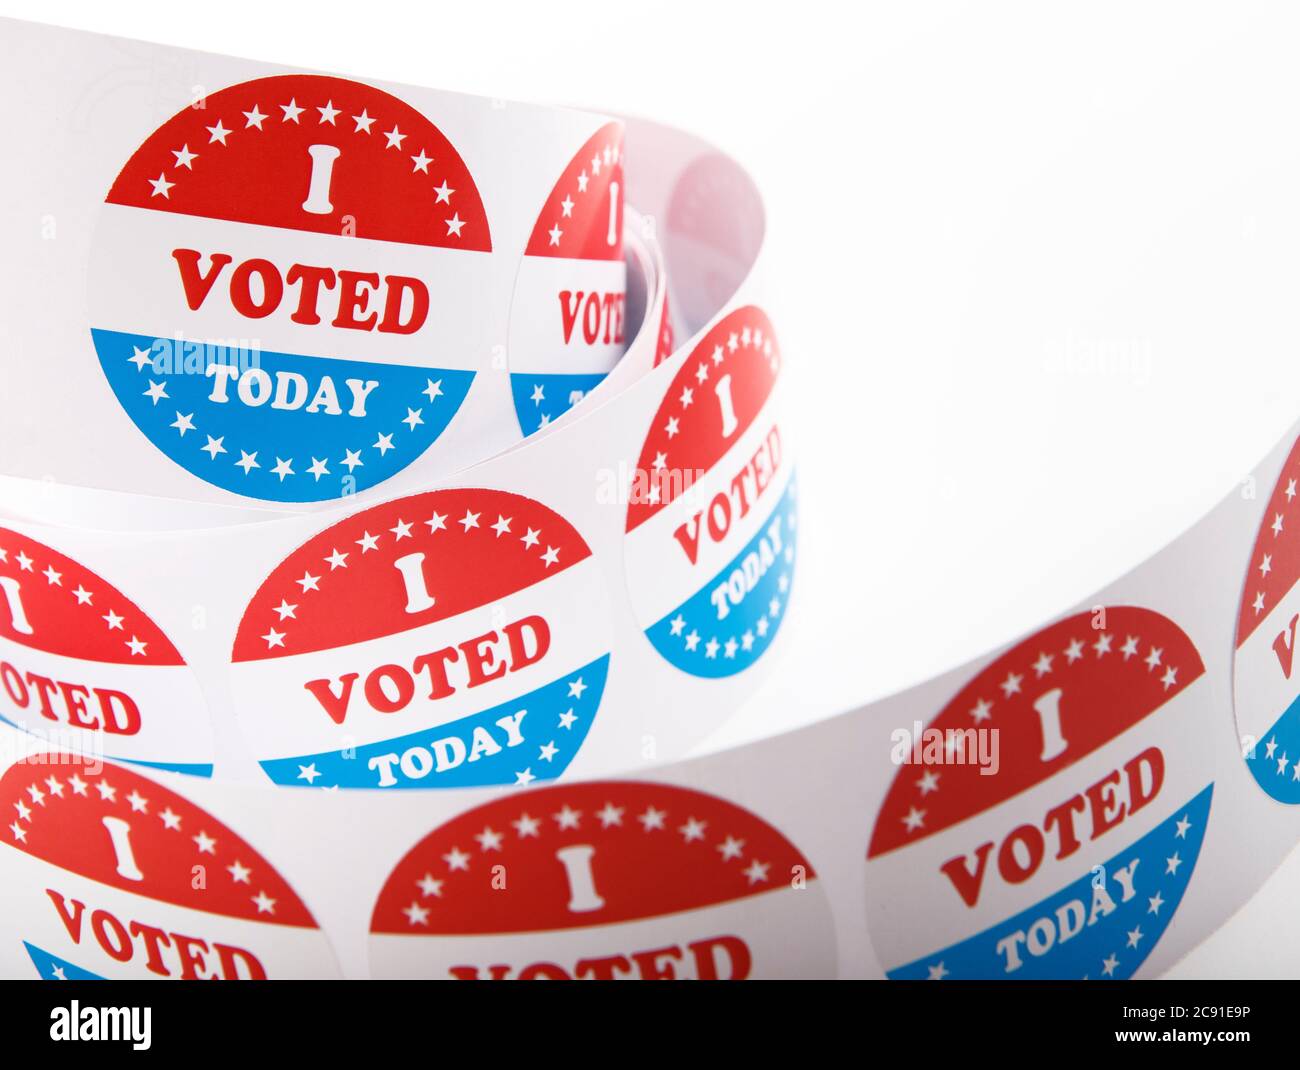 Vote political election stickers with patriotic American Stars Stock Photo